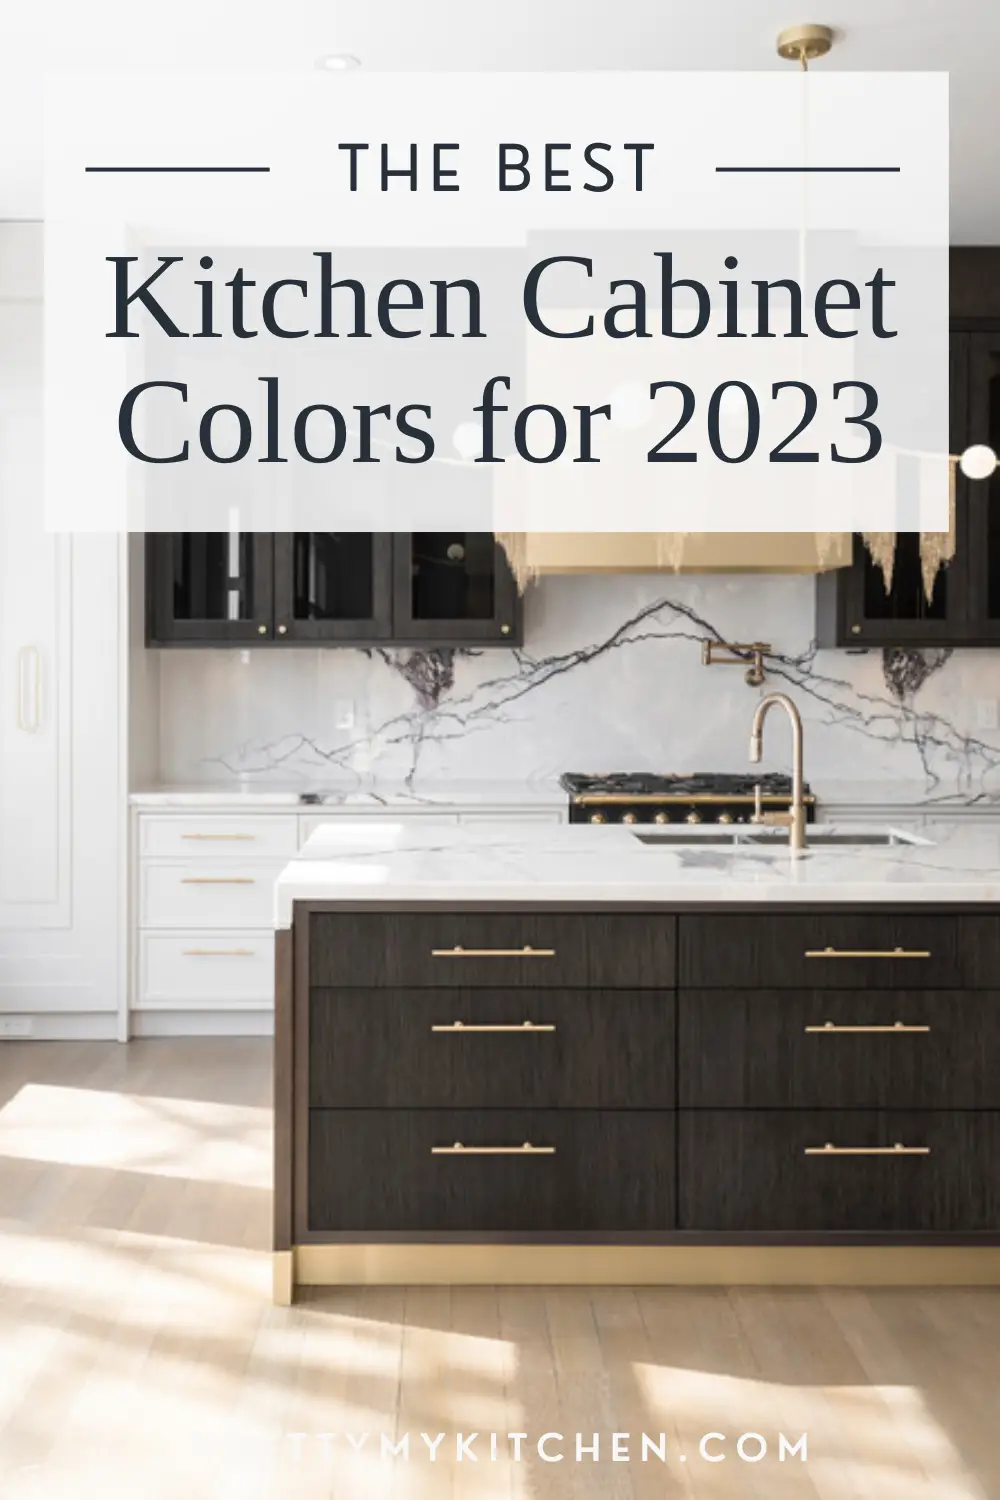 Kitchen Cabinet colors for 2023